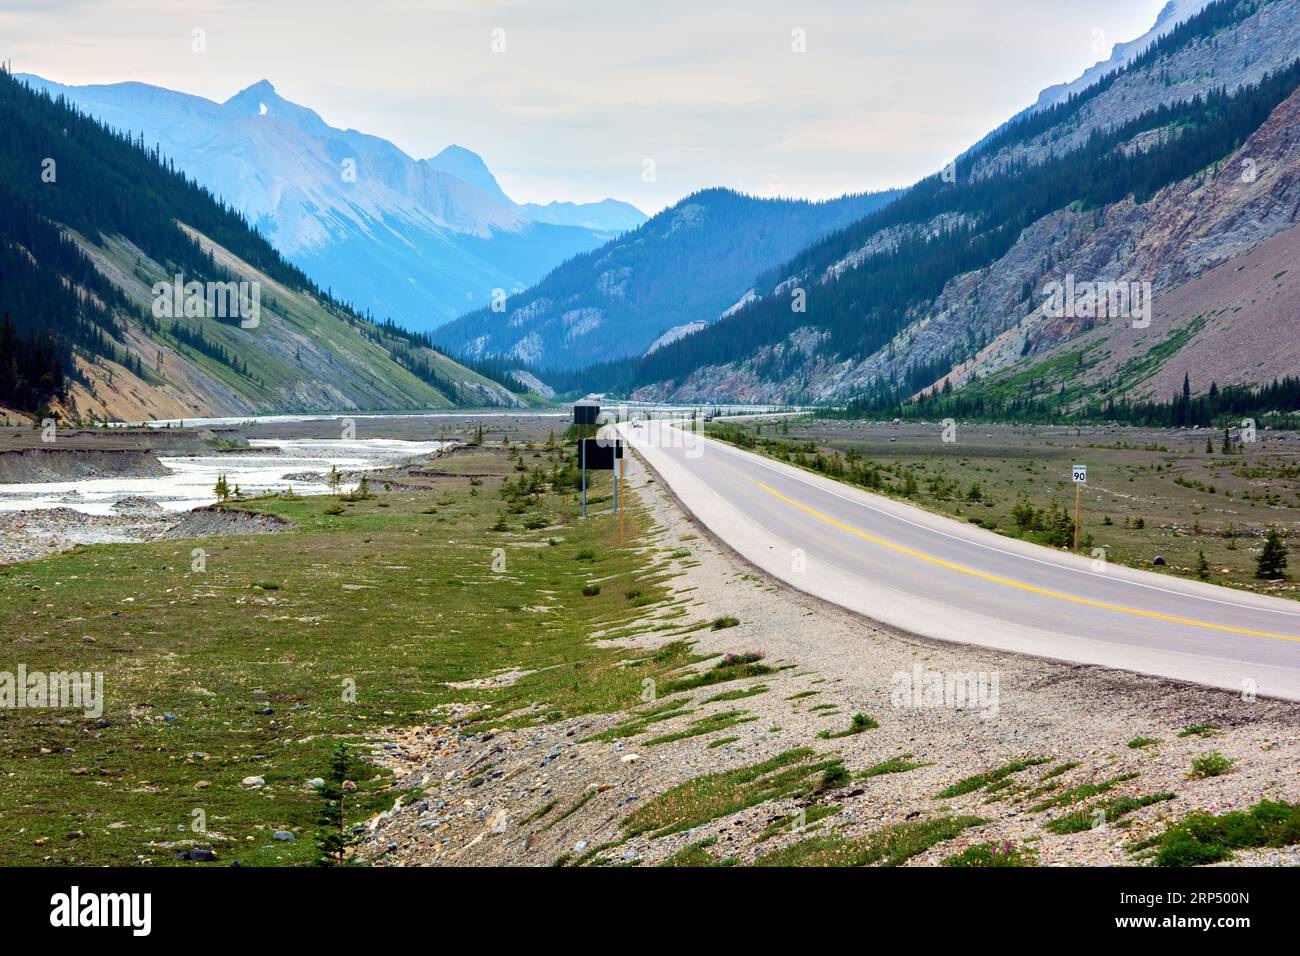 Icefields Parkway through Jasper National Park with great views of the Rocky Mountains. Stock Photo